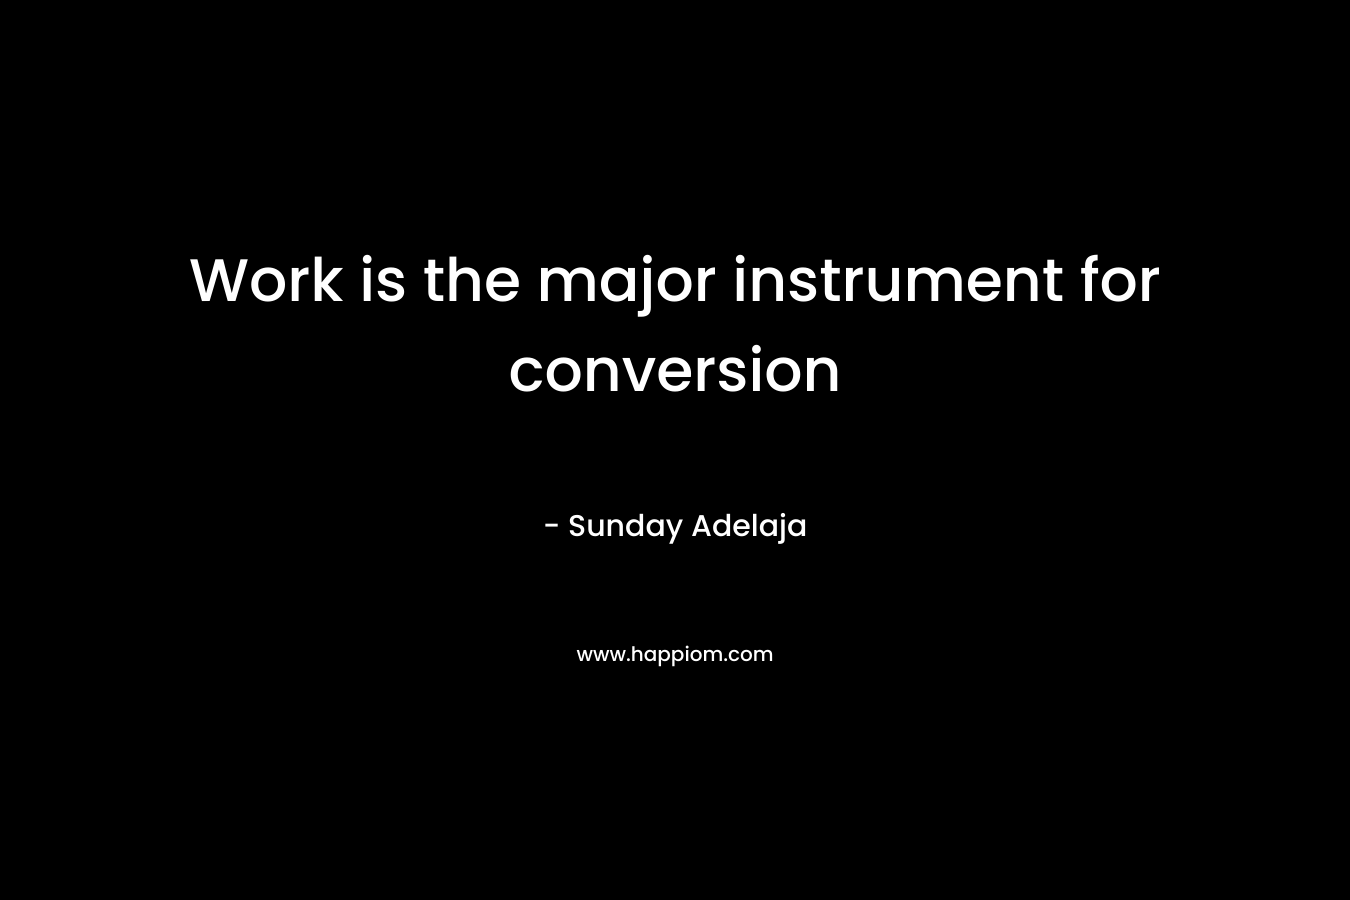 Work is the major instrument for conversion